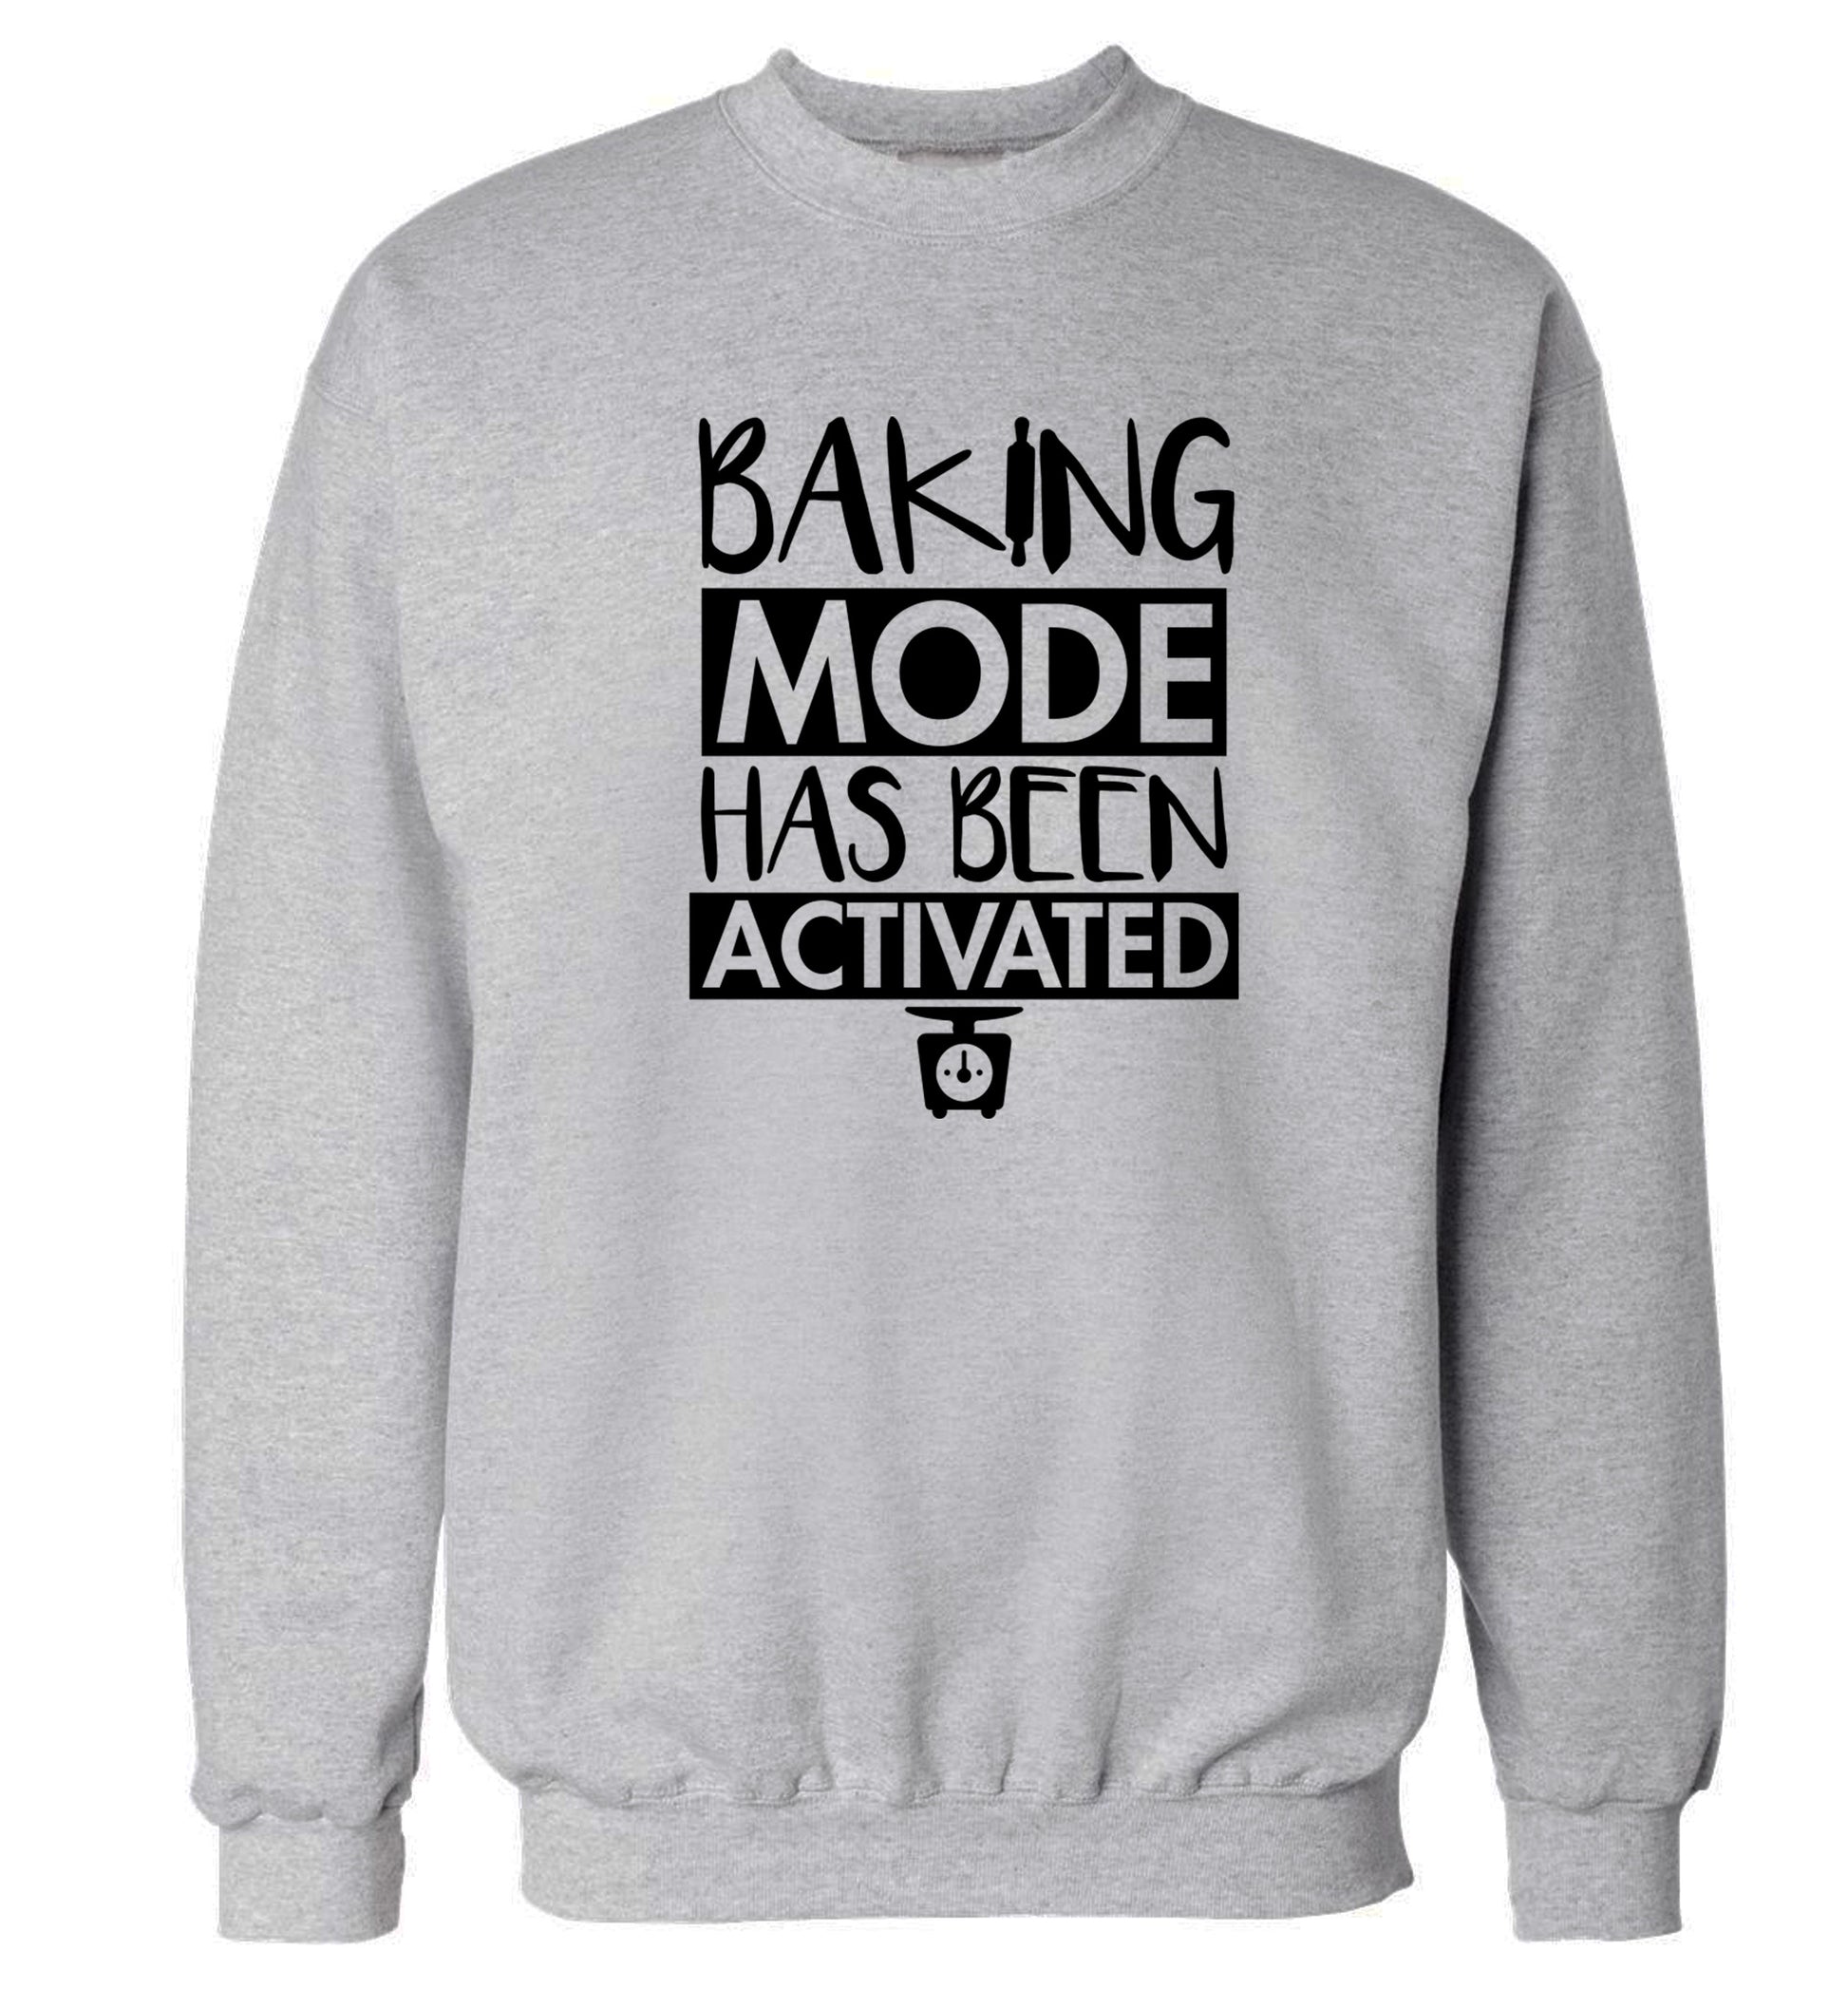 Baking mode has been activated Adult's unisex grey Sweater 2XL